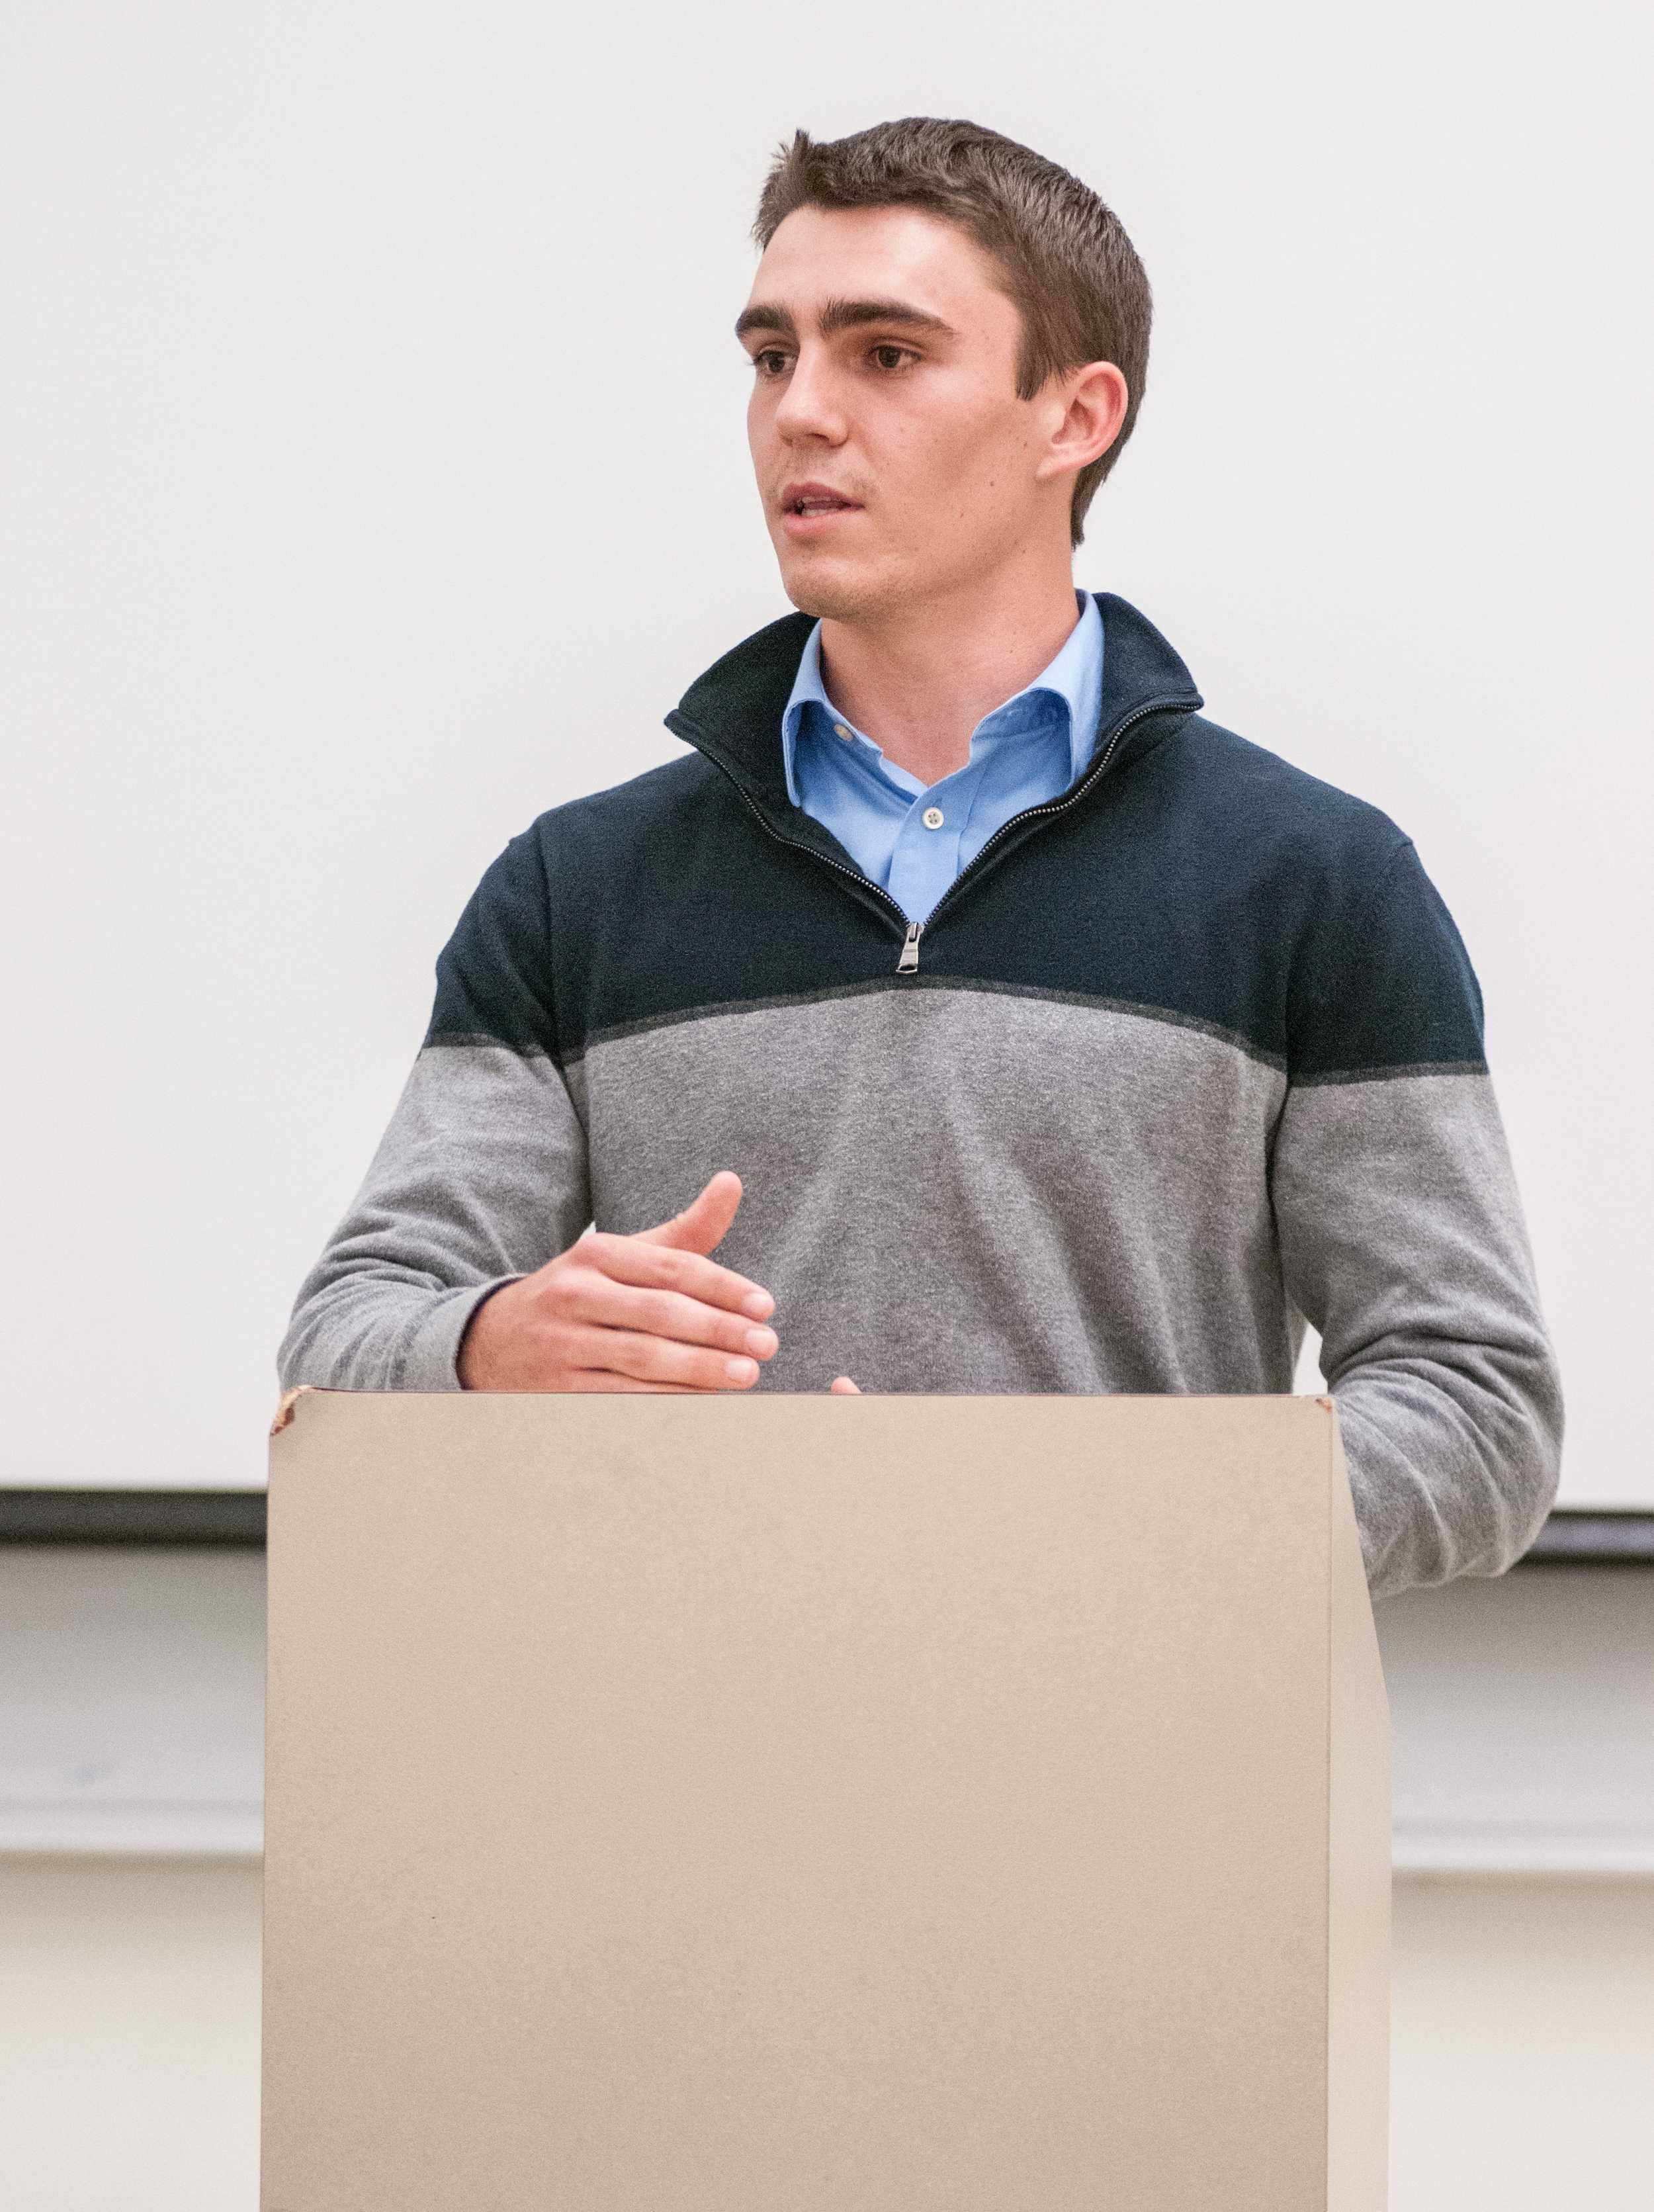 STAR //&nbsp; Gustavo VasquezThe STAR hosted exclusive interviews on Feb. 24 with this year’s presidential candidates for Associated Students. The candidates include environmental studies and economics double-major, Brandon Mercer, and psychology ma…